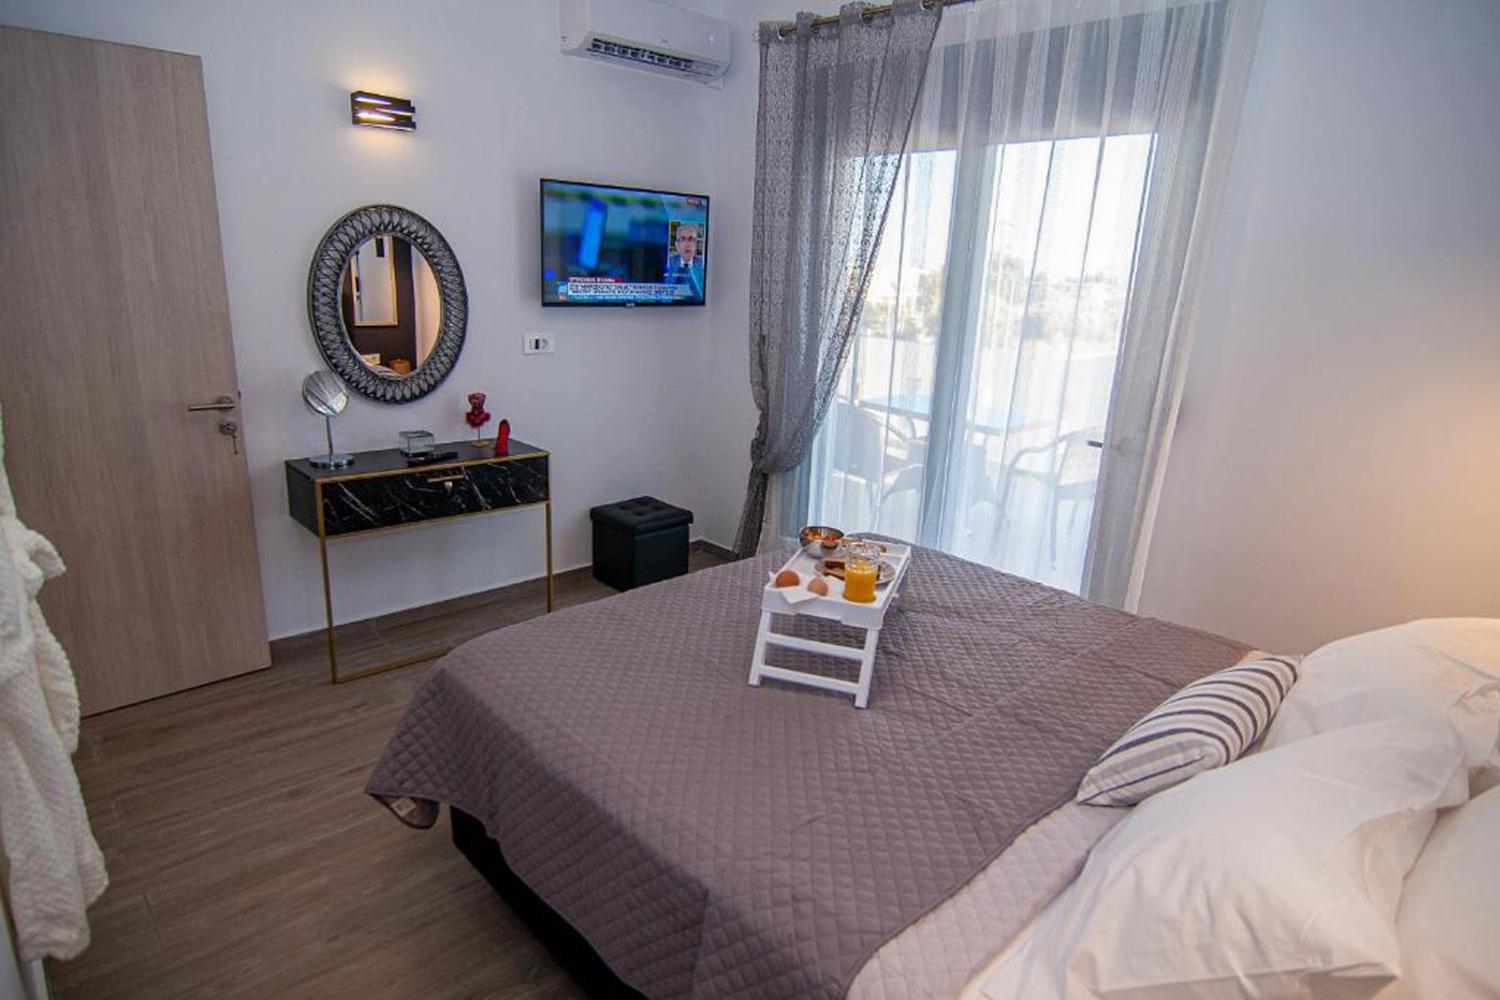 Double bedroom with en suite bathroom, A/C, and upper terrace access 